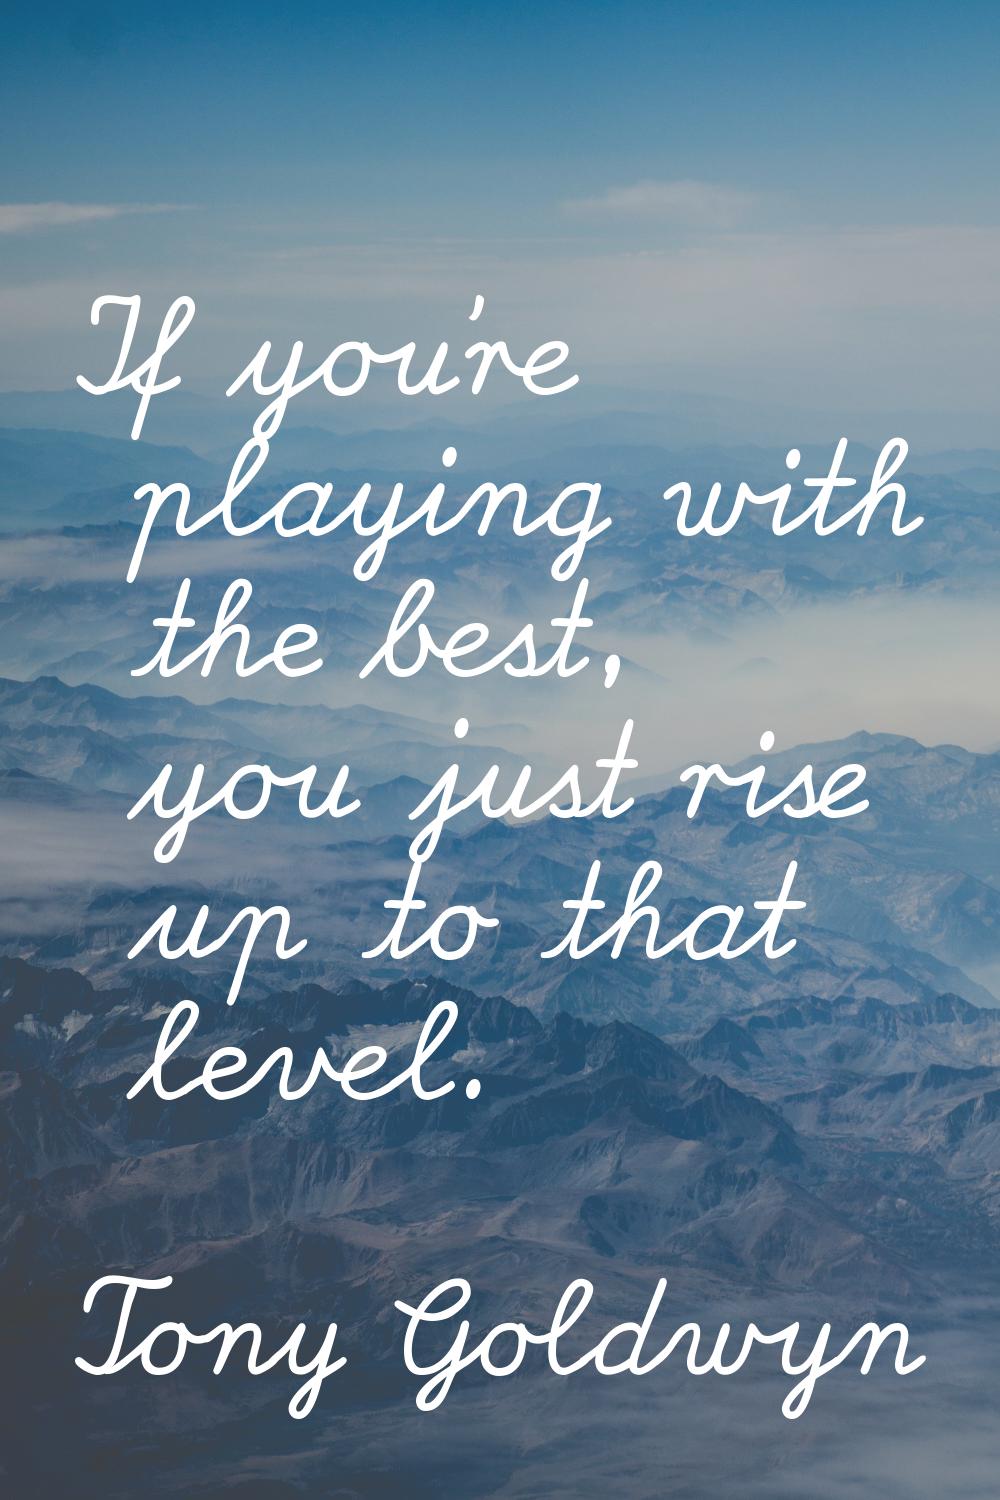 If you're playing with the best, you just rise up to that level.